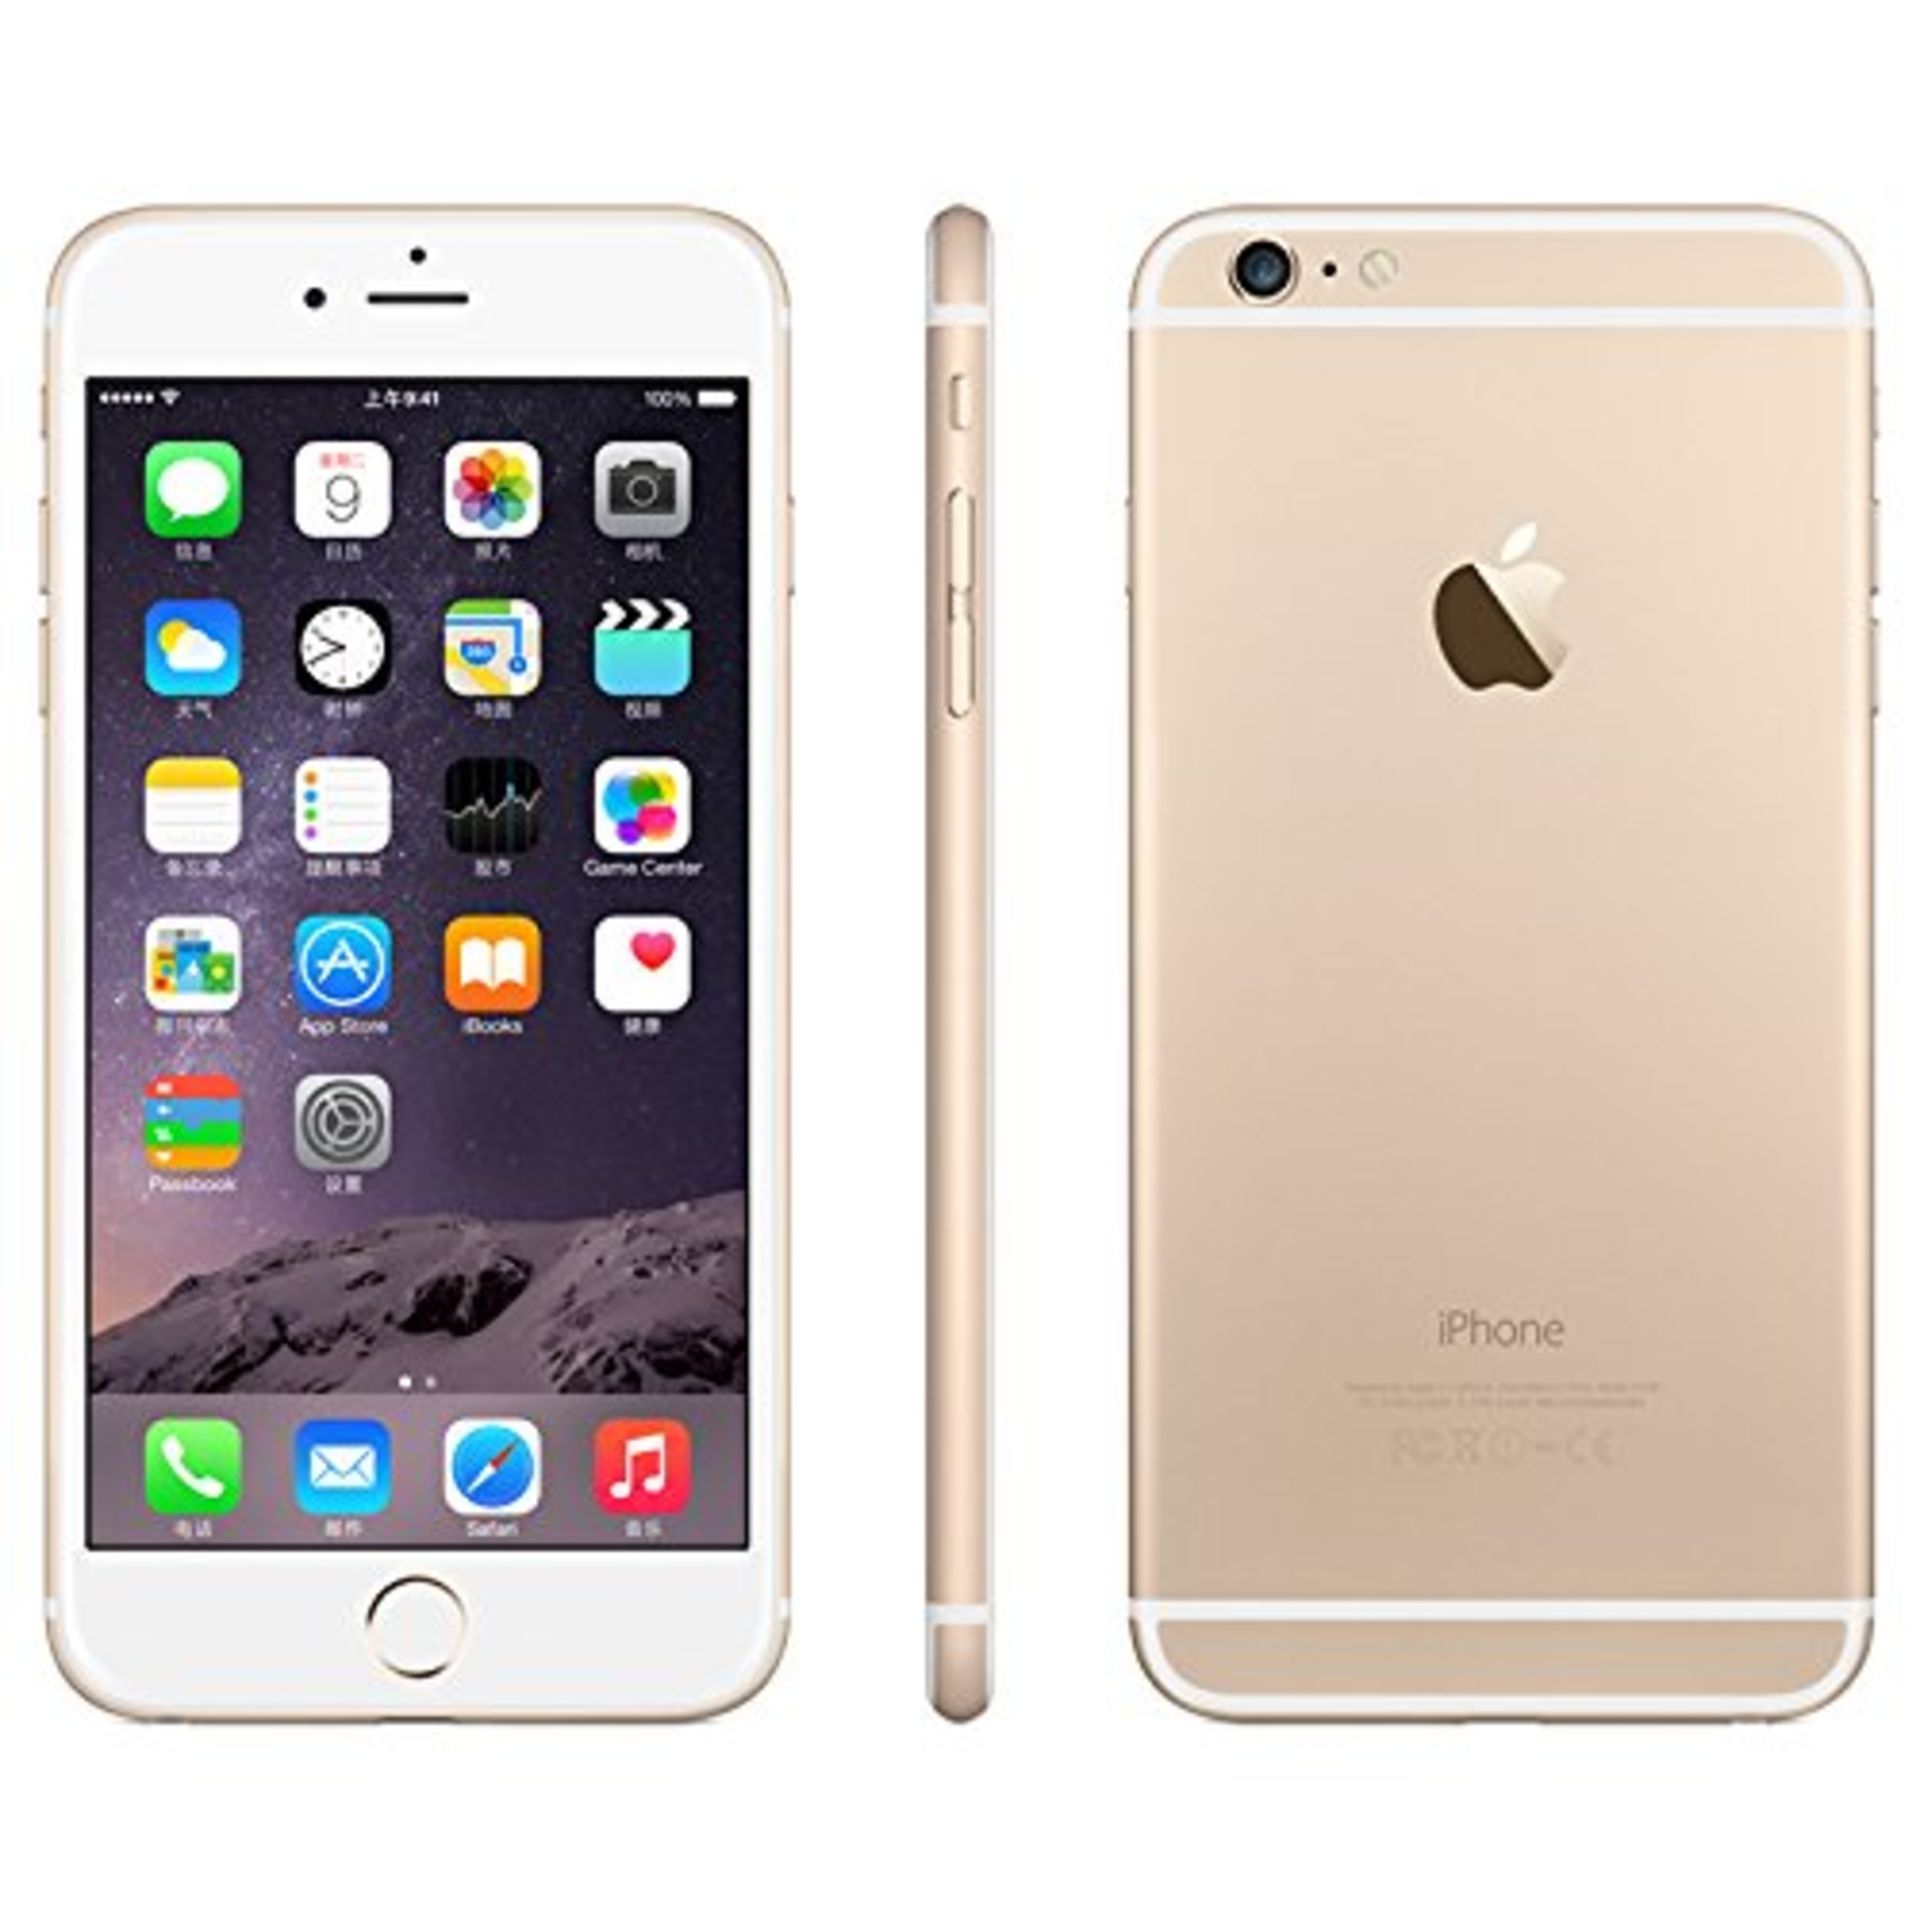 Grade A Apple iphone 6 plus 16GB Colours May Vary Touch ID Item available approx 12 working days